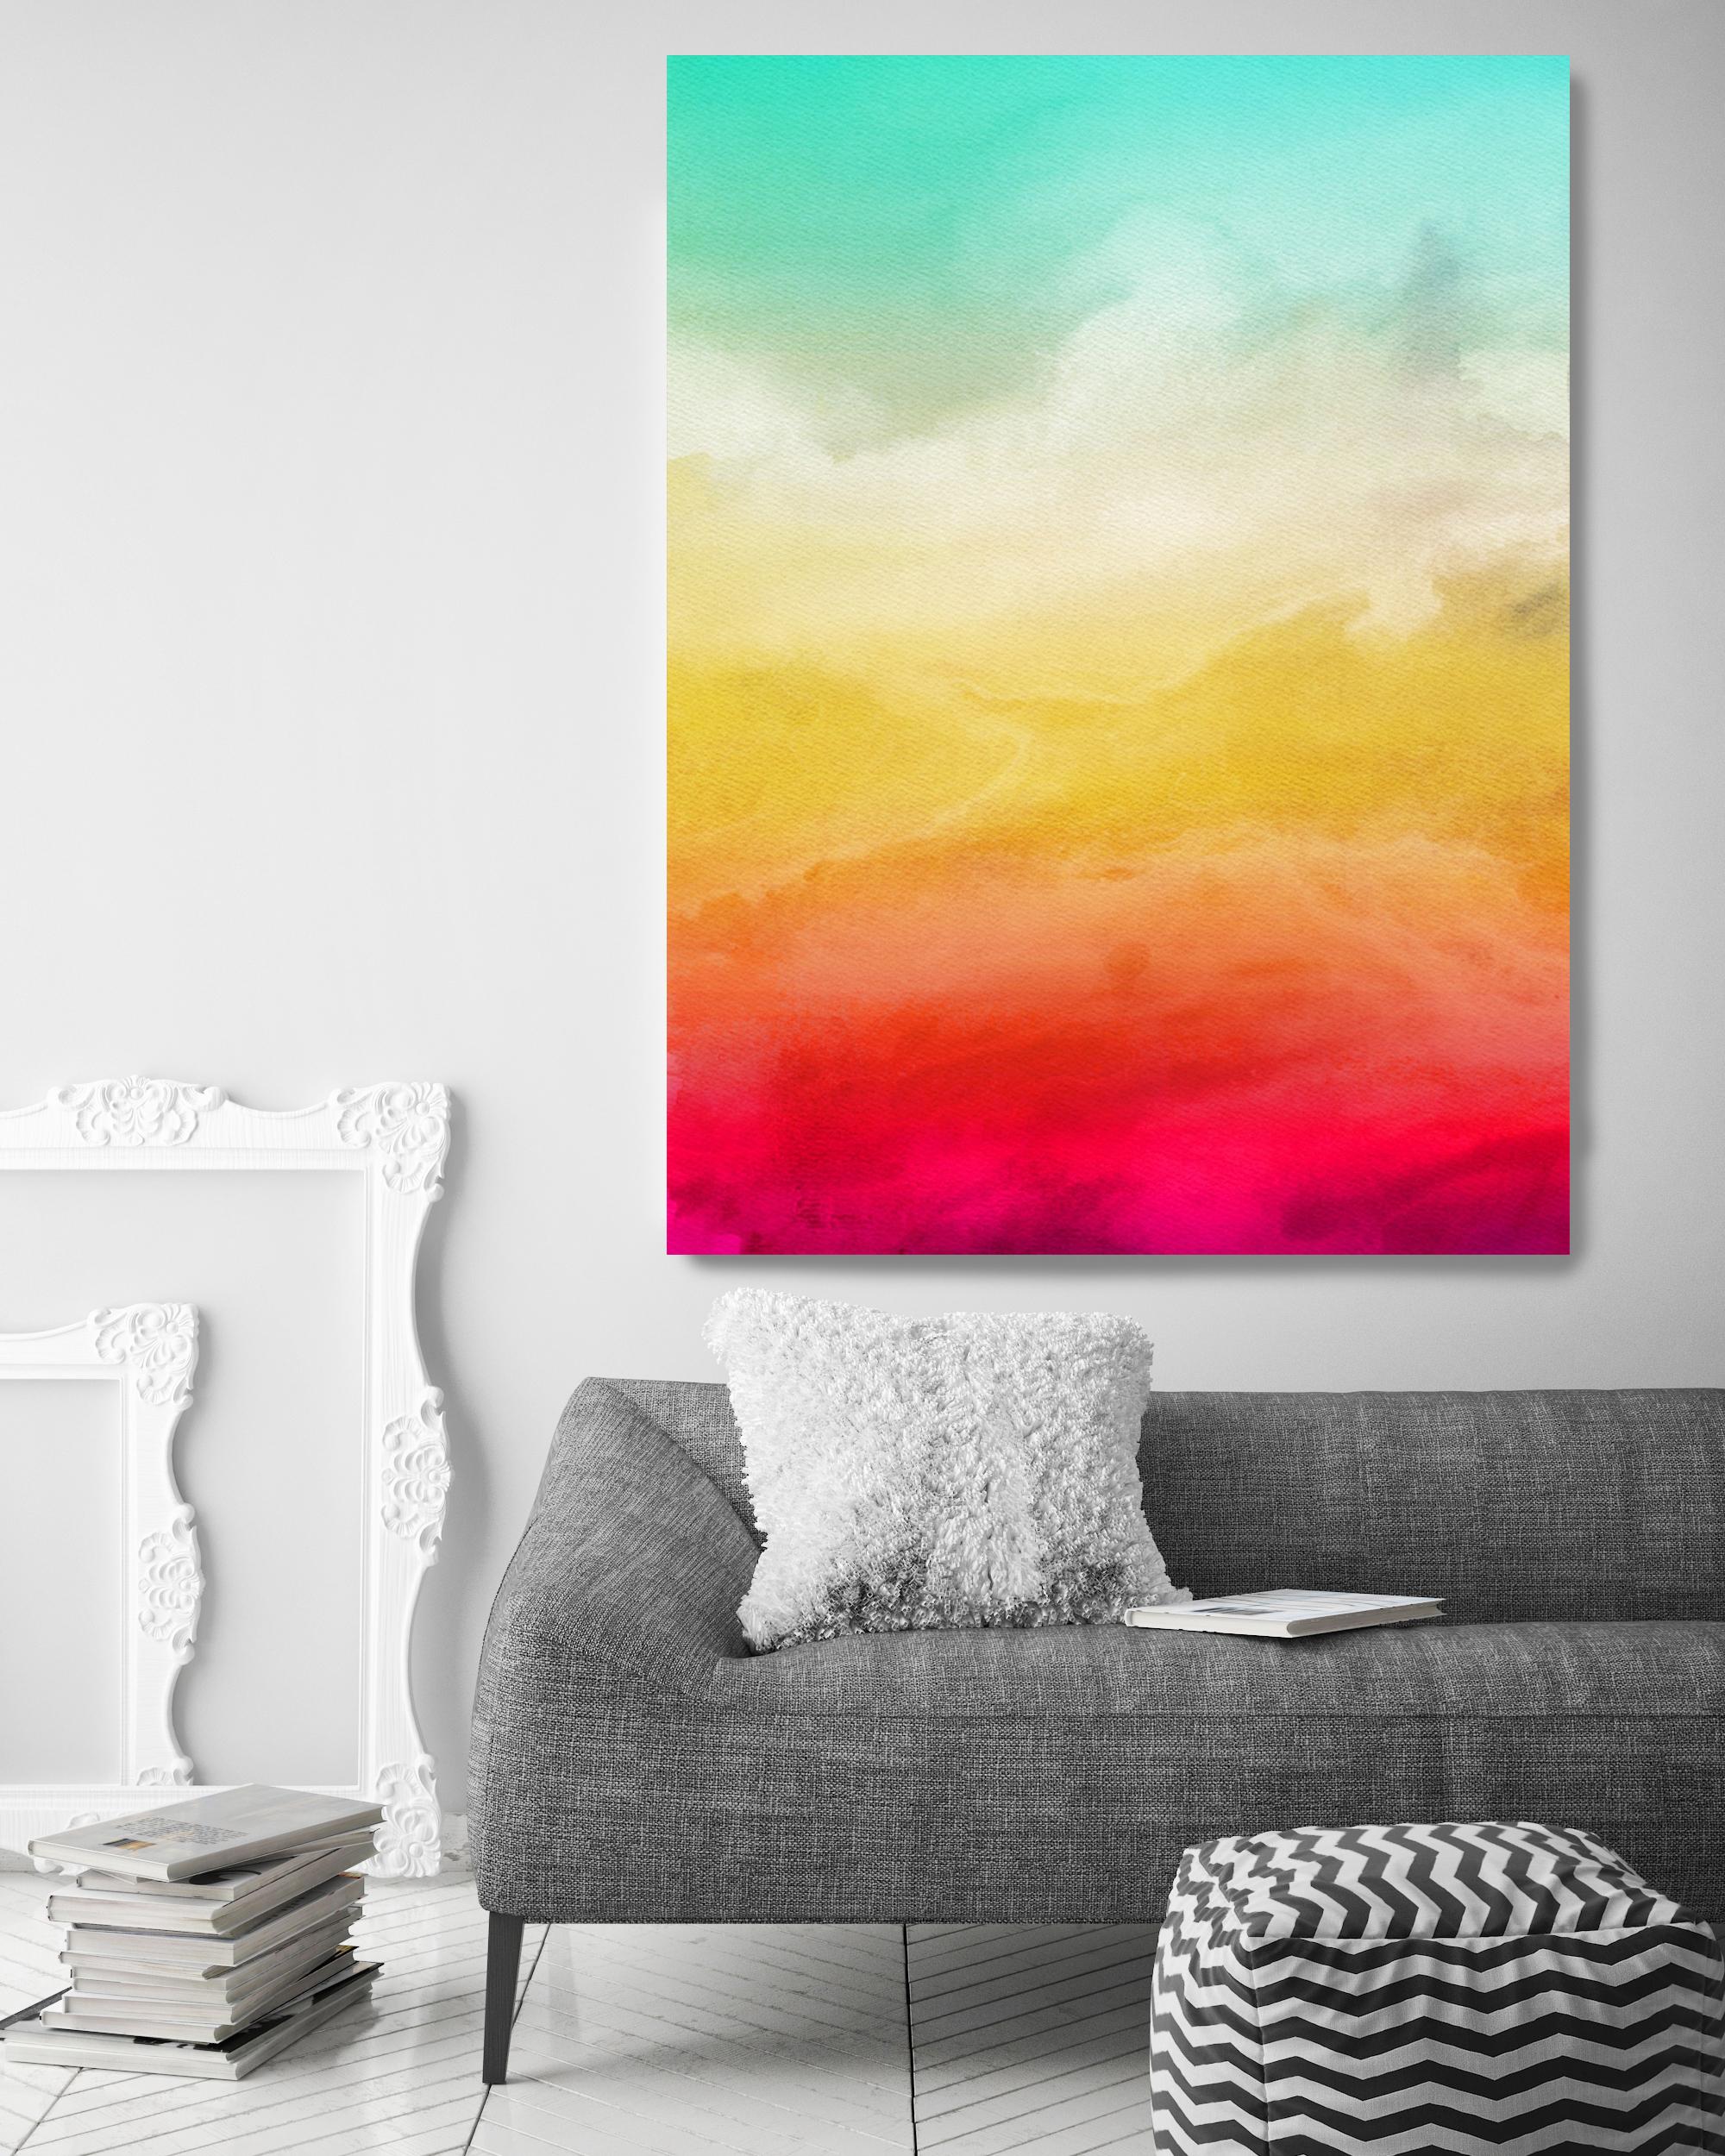 Aqua Red Yellow Watercolor Painting Hand Textured Giclee on Canvas 40W x 60H